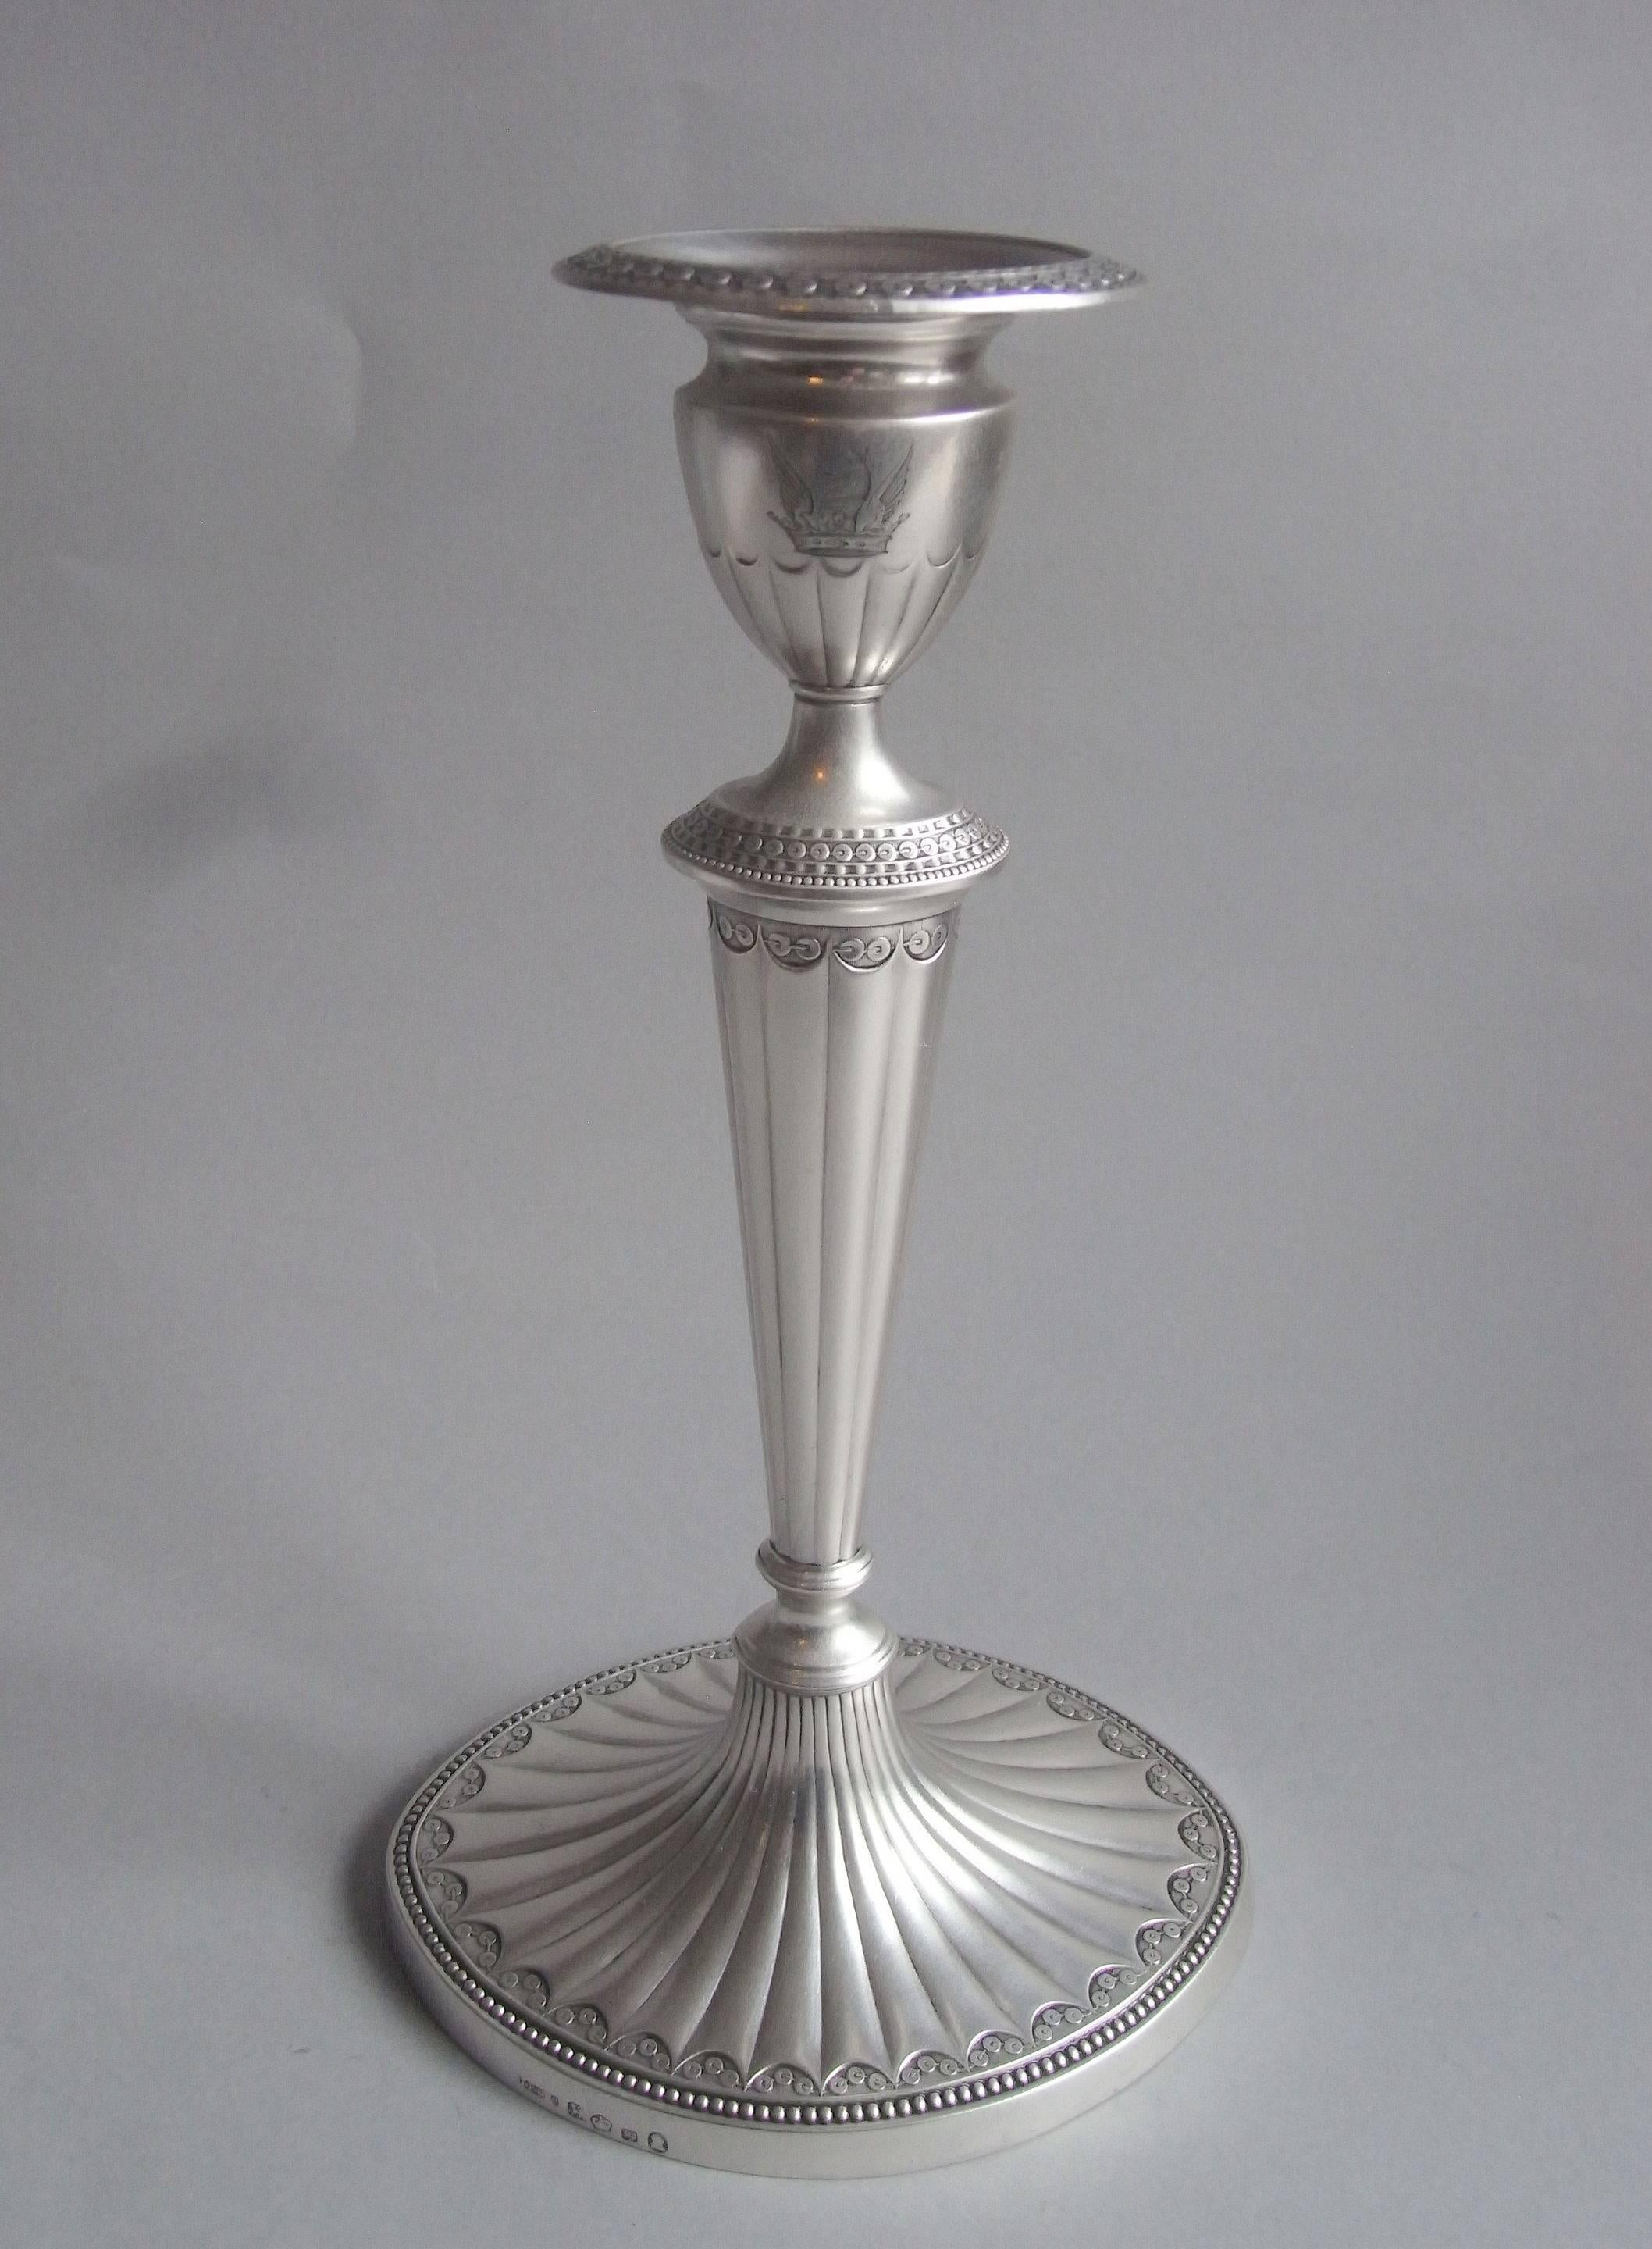 The Candlesticks unusually display oval bases which are decorated with bat wing fluting and beading as well as tiny stylized roundels which are threaded together to form a shaped band at the edge of the fluting. The main shaft and socket are also